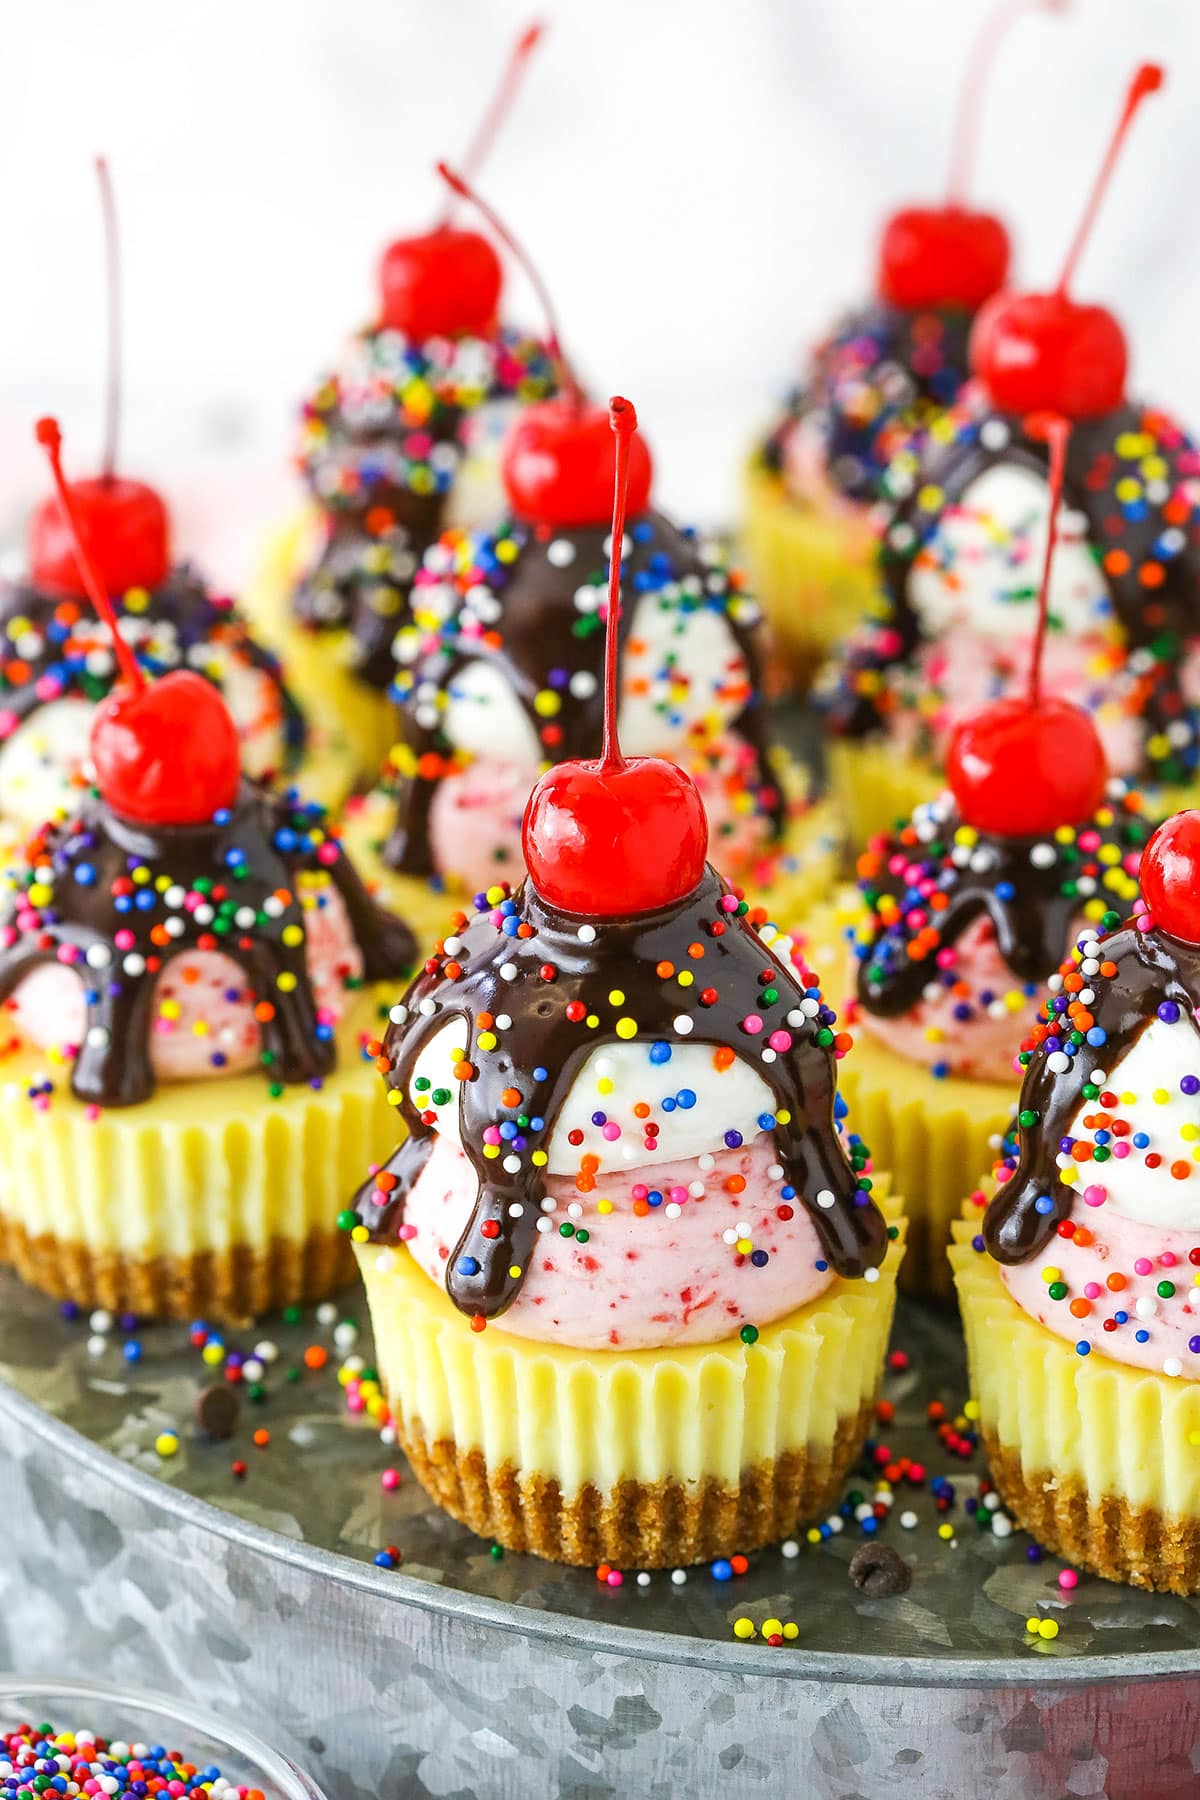 Ice Cream Sundae Mini Cheesecakes topped with chocolate drip and sprinkles with a cherry on top, on a metal platter